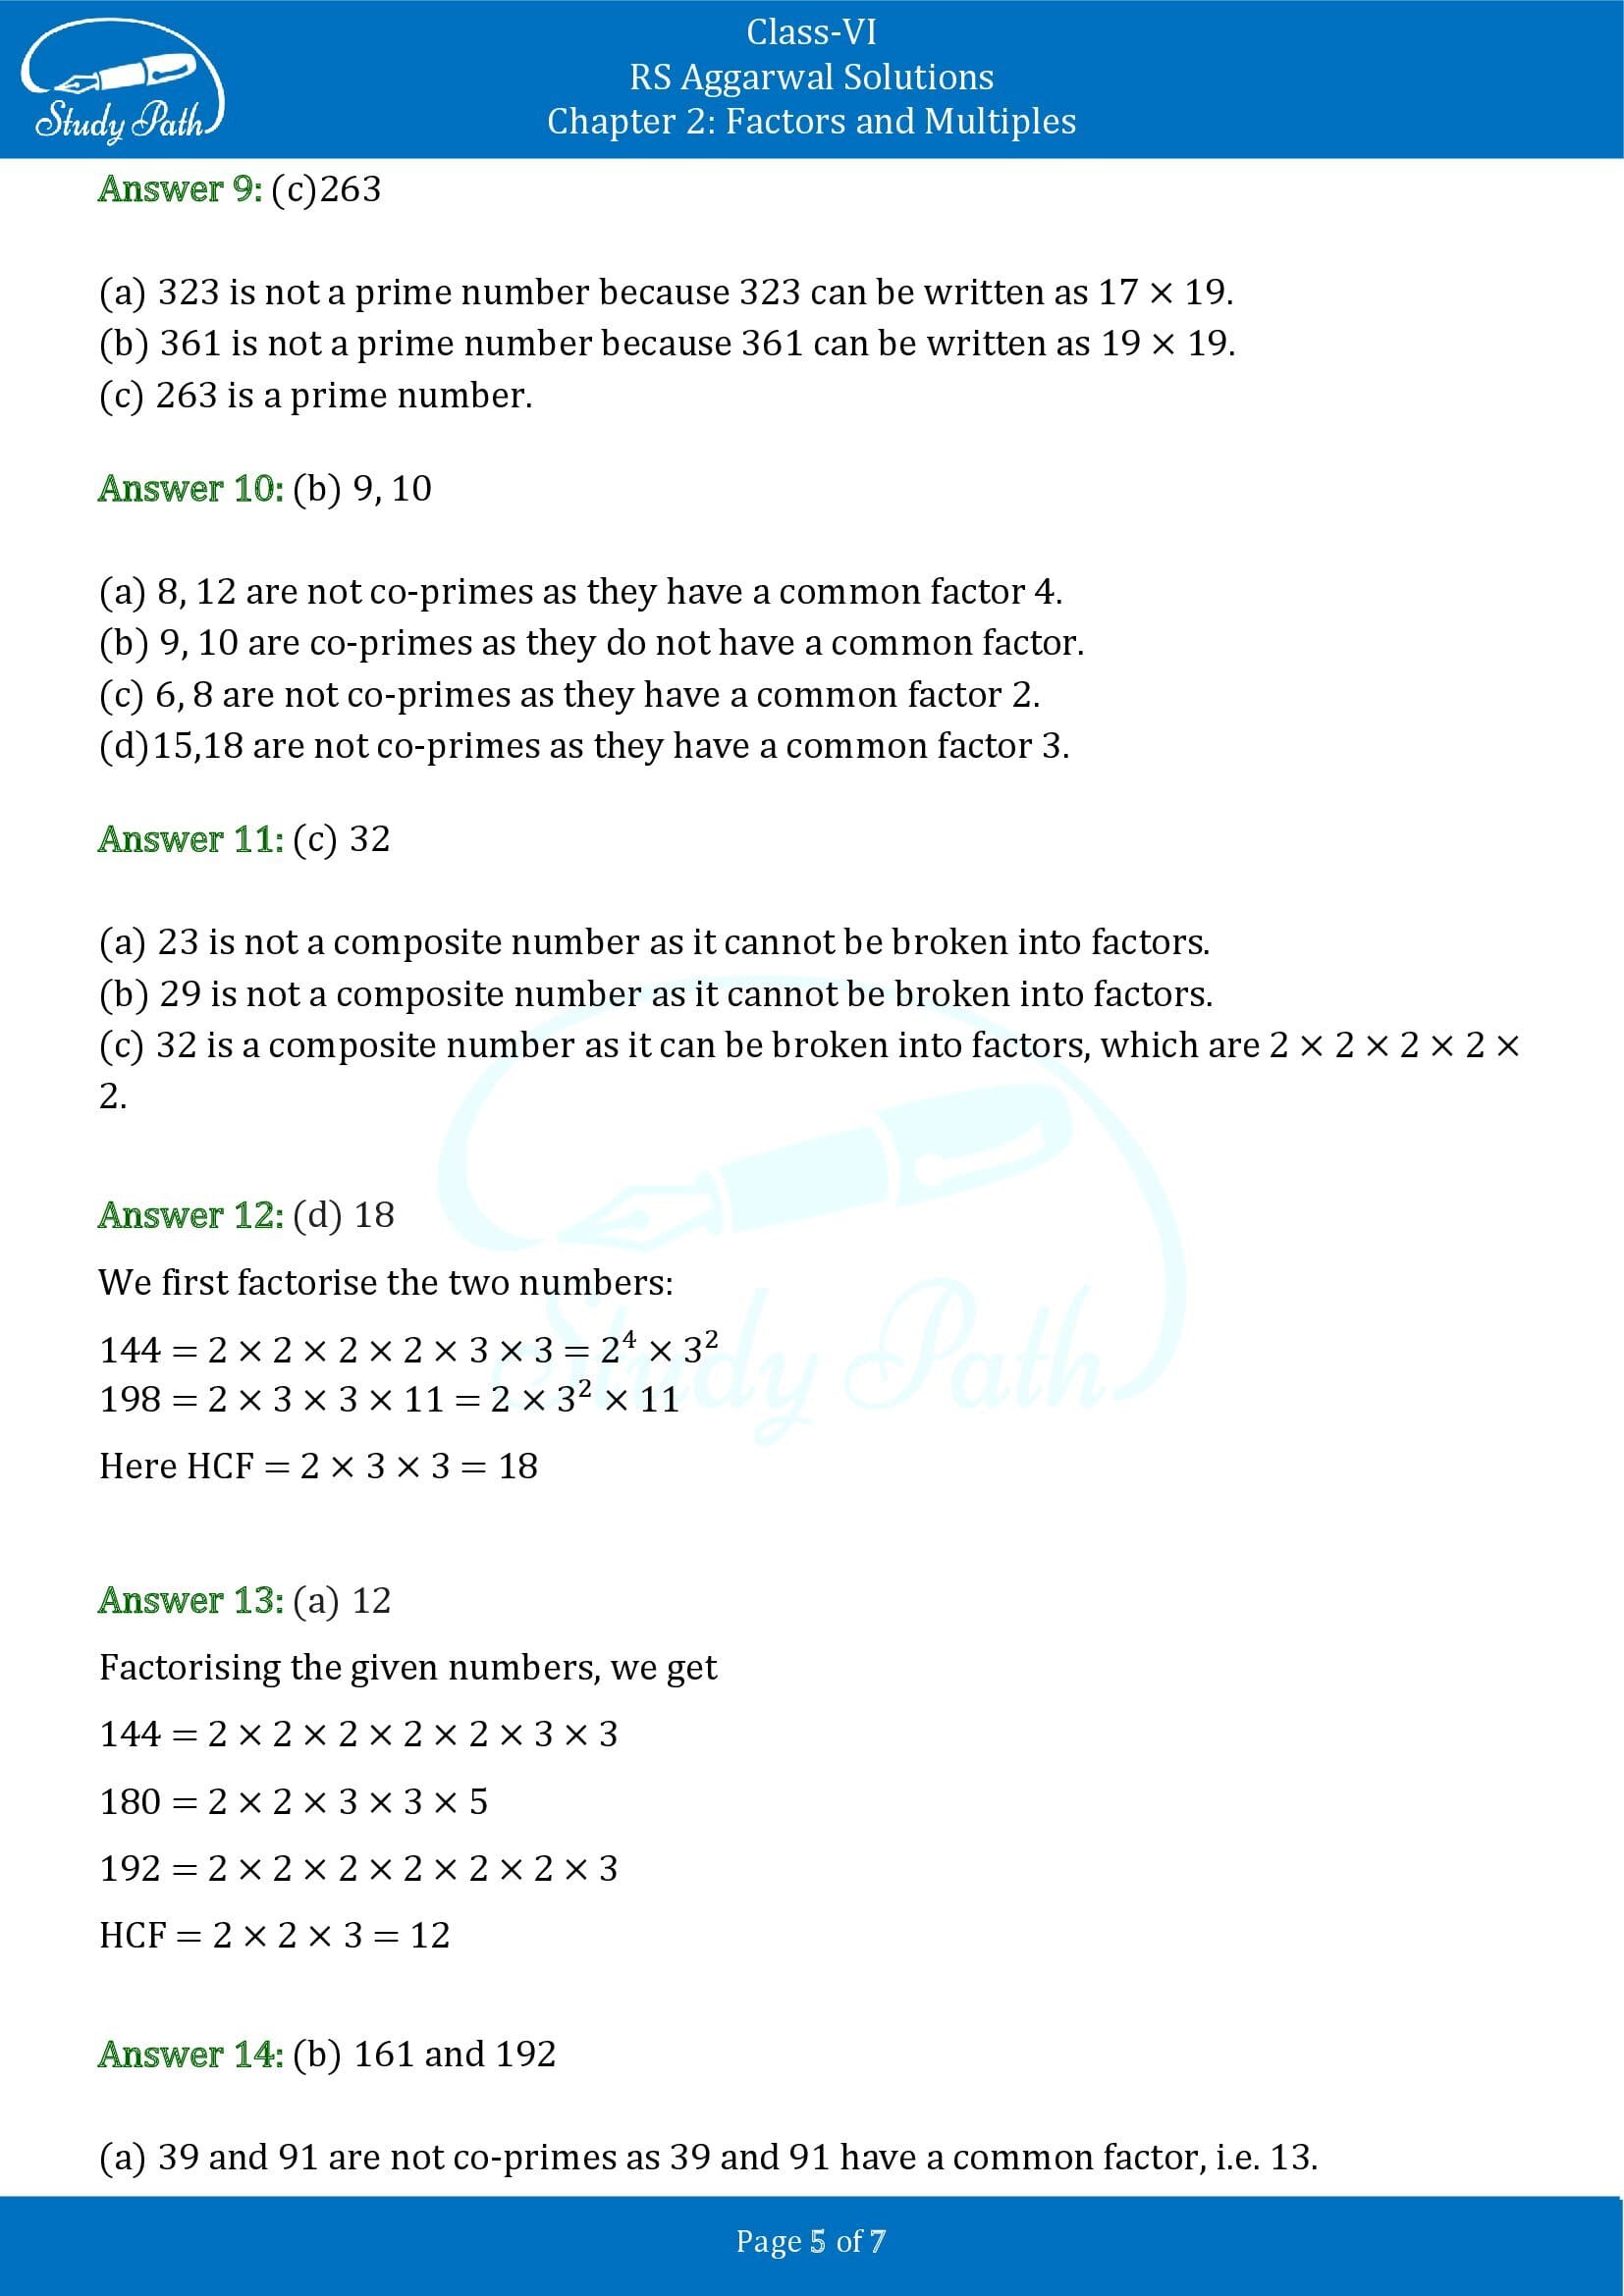 RS Aggarwal Solutions Class 6 Chapter 2 Factors and Multiples Exercise 2F MCQ 00005